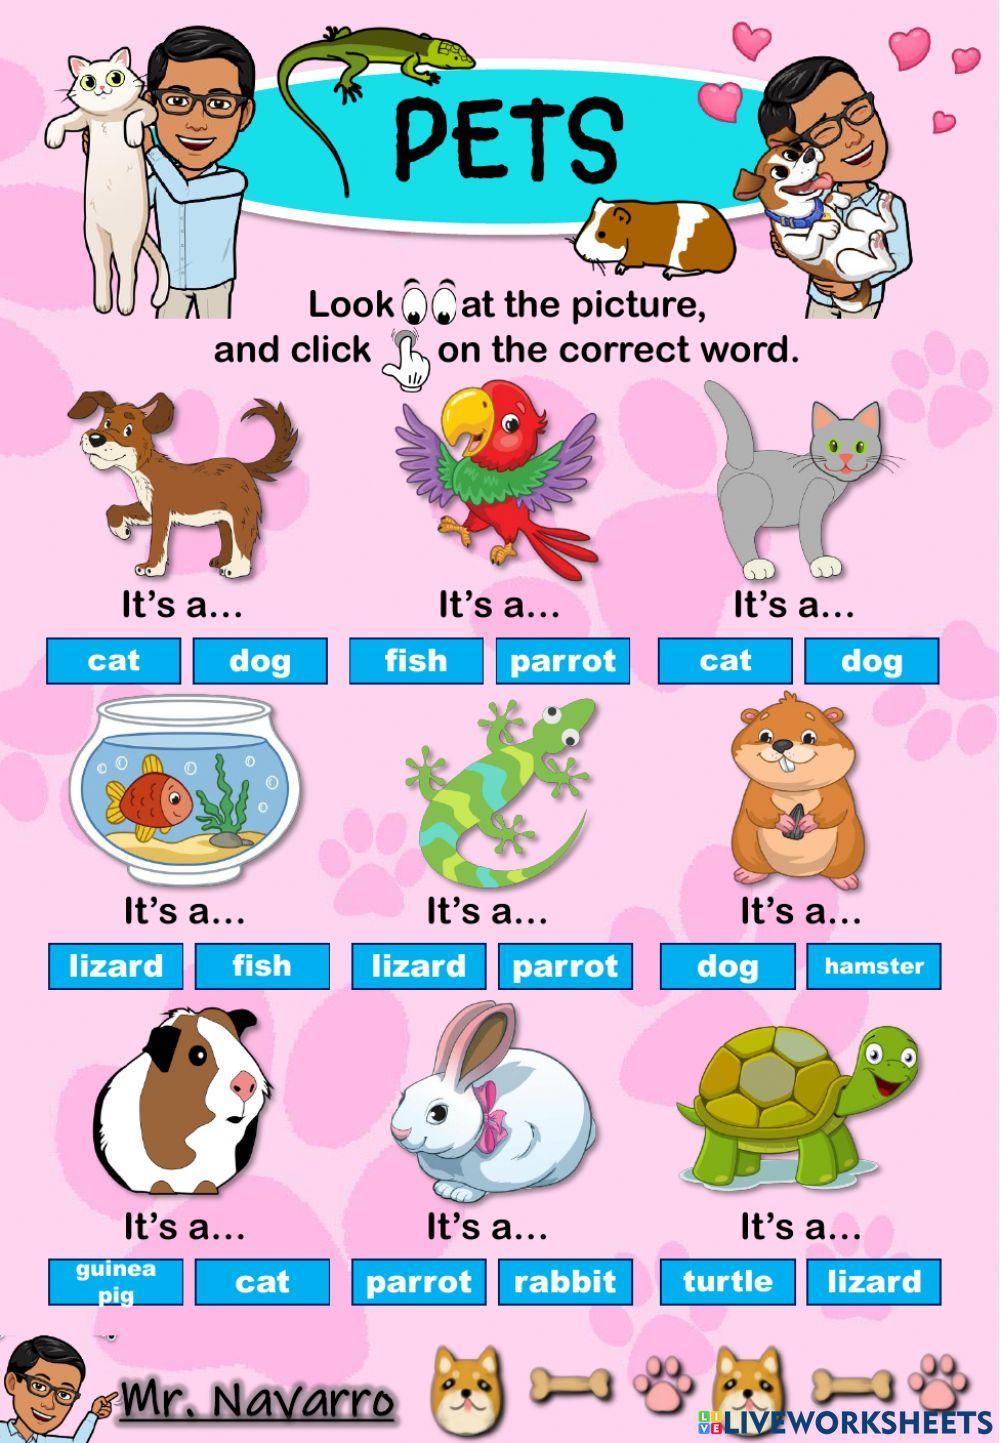 Pets (Look at the picture and click on the correct word)